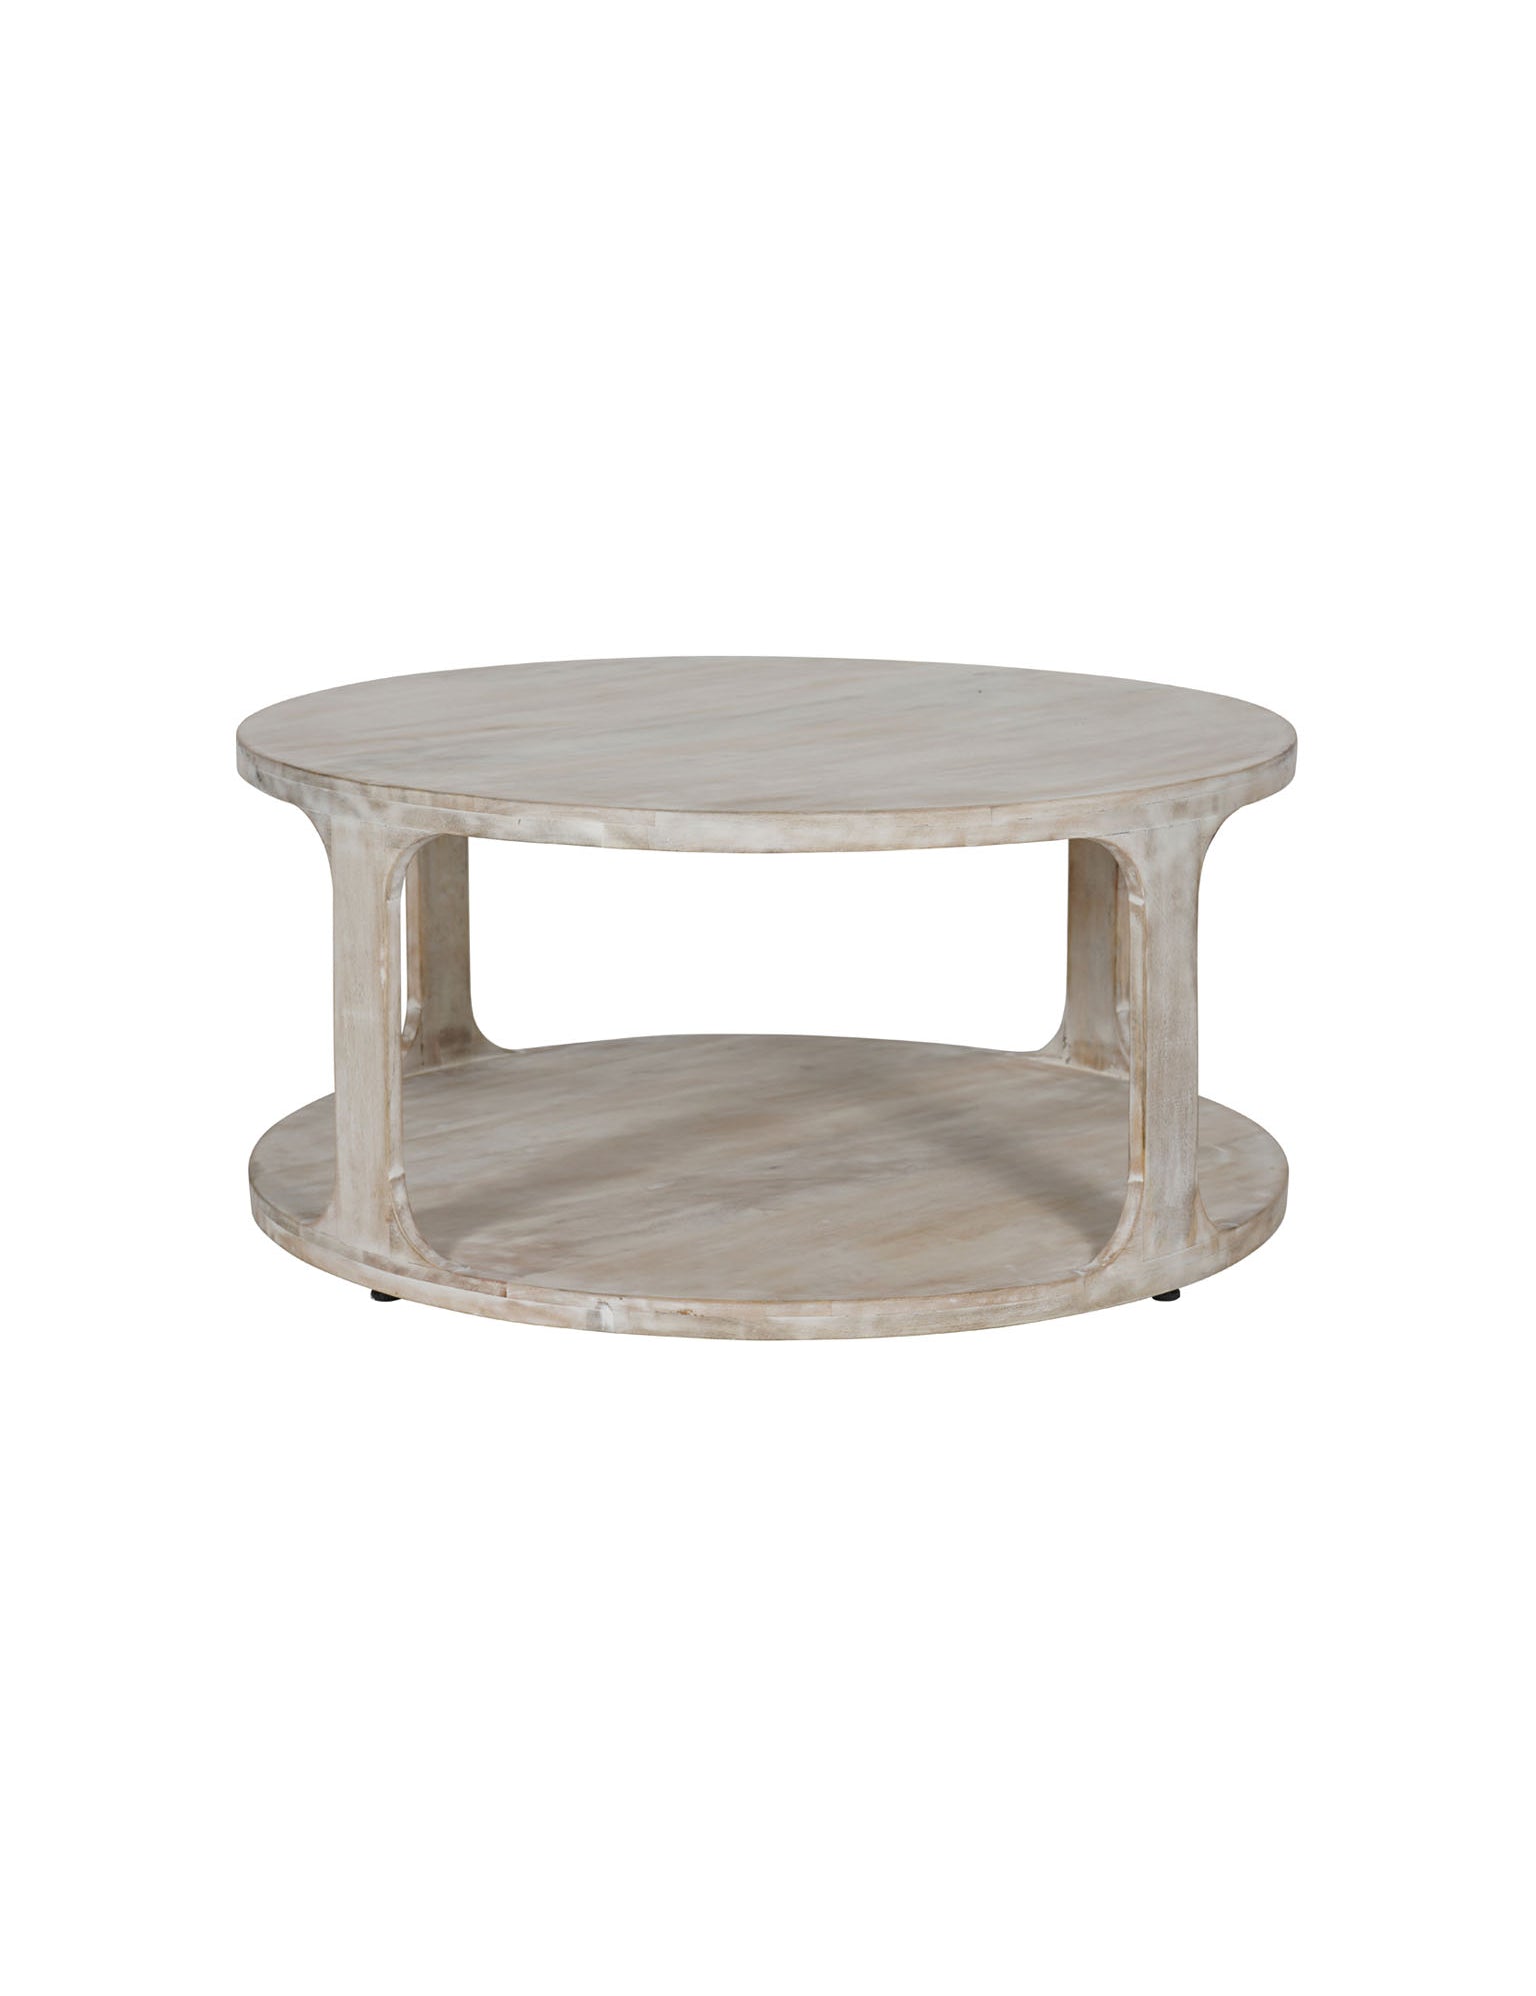 Solid Carved Wooden Coffee Table in Whitewash Finish